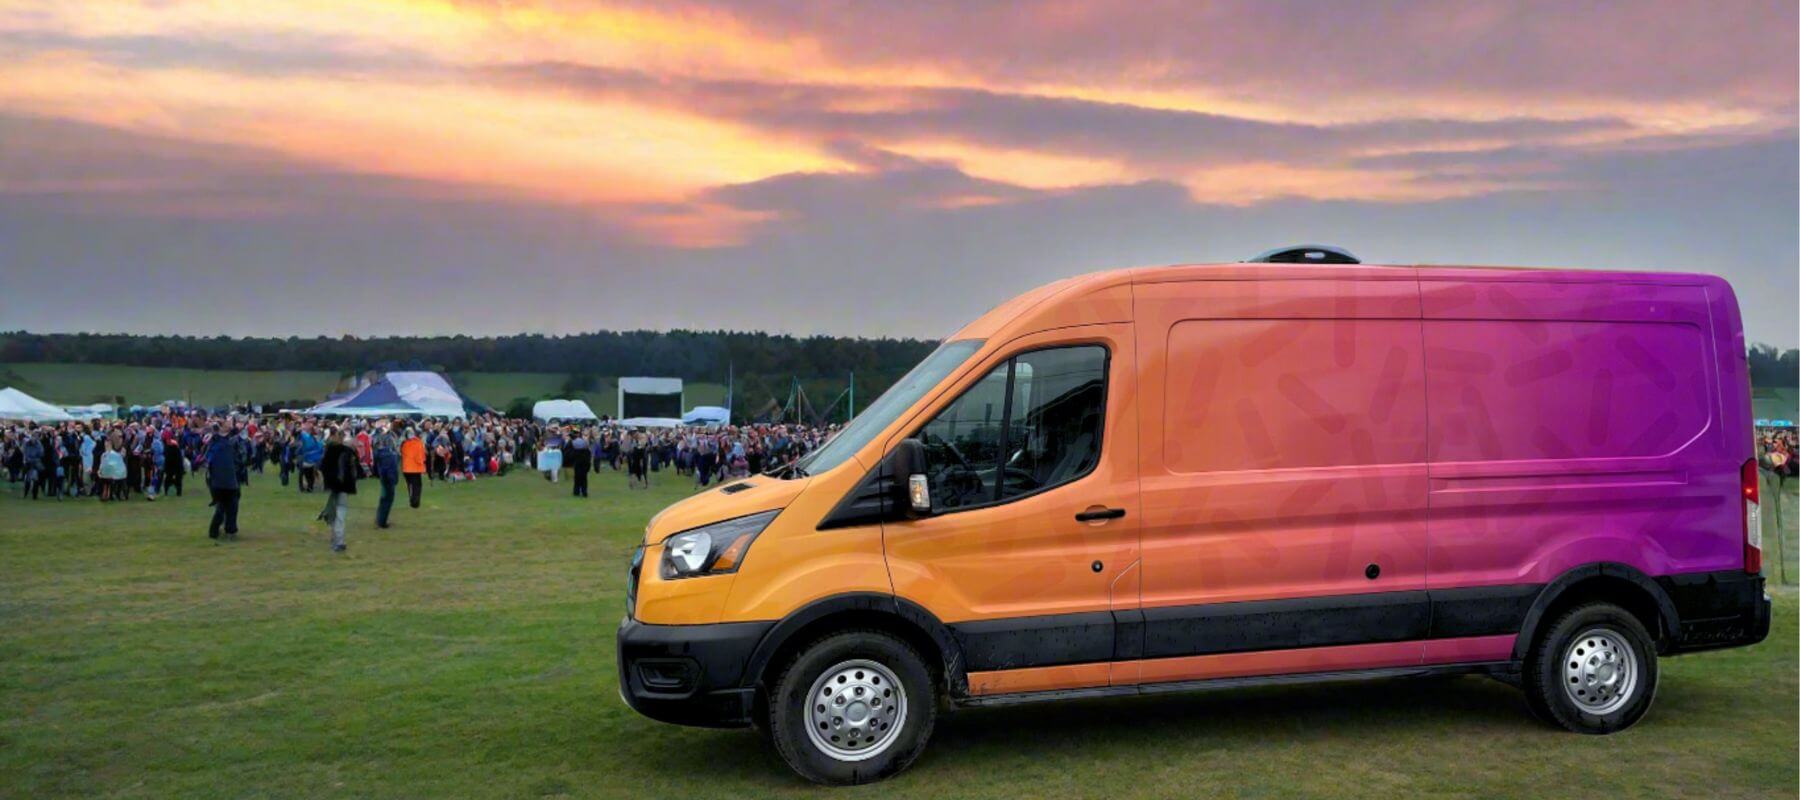 Mobile Business Take Your Business Anywhere Flexible Van Solutions for On-the-Go Operations